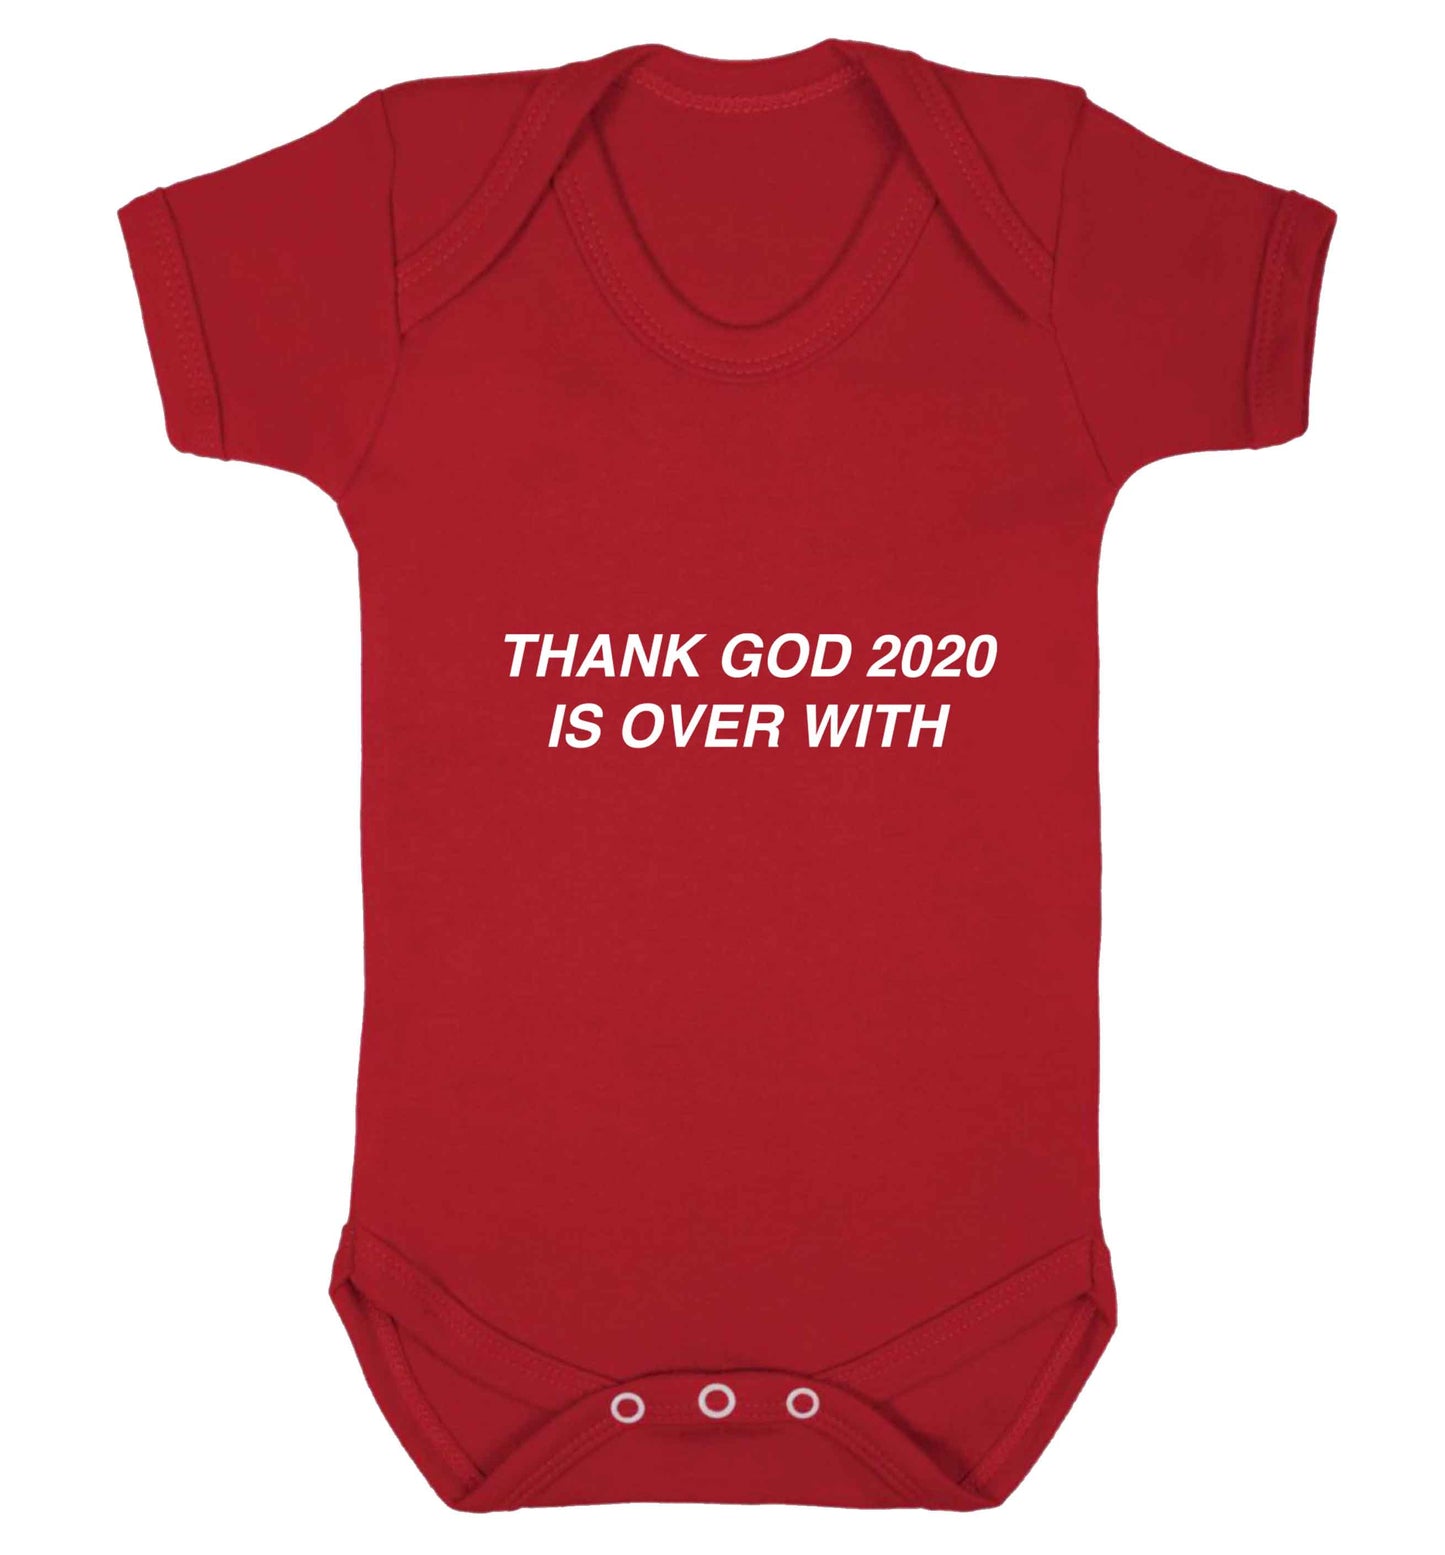 Thank god 2020 is over with baby vest red 18-24 months